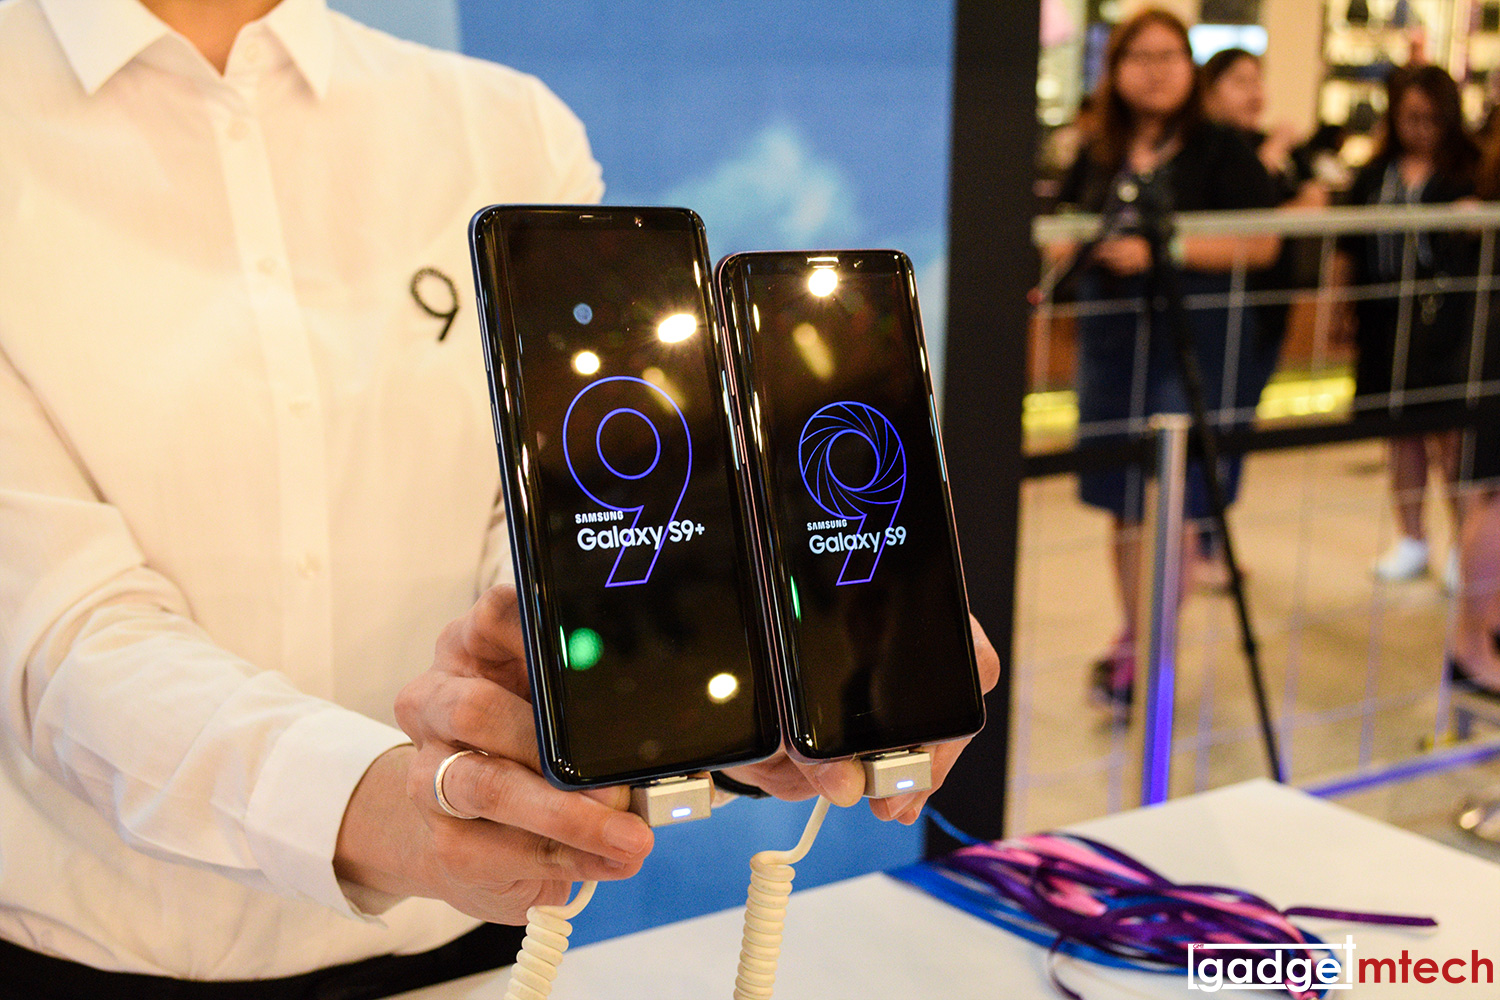 Samsung Galaxy S9 and S9+ Launch_2